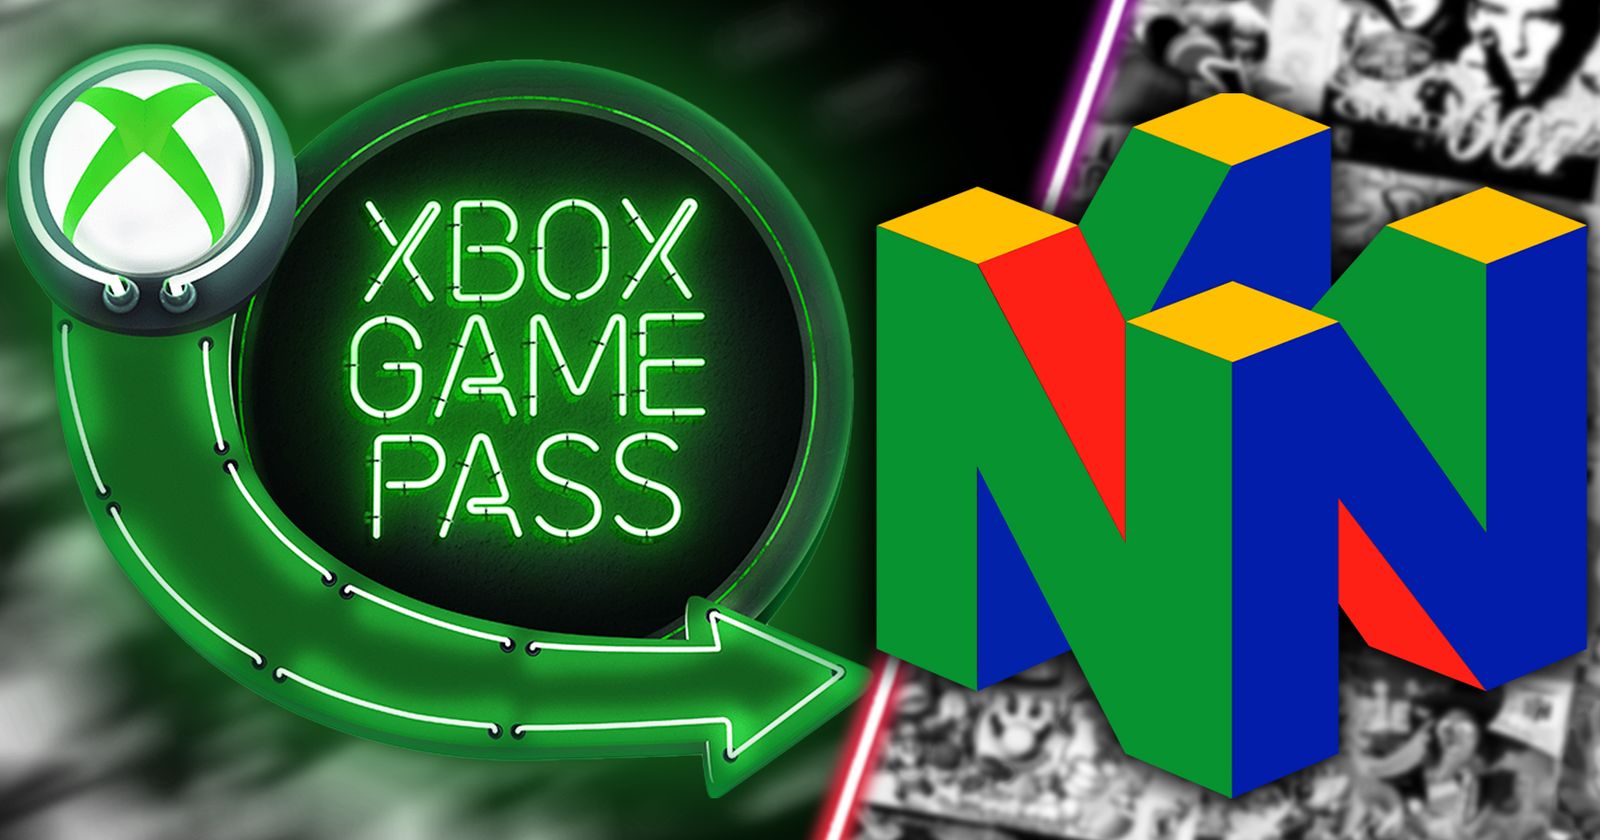 An N64 classic may be coming to Xbox Game Pass soon